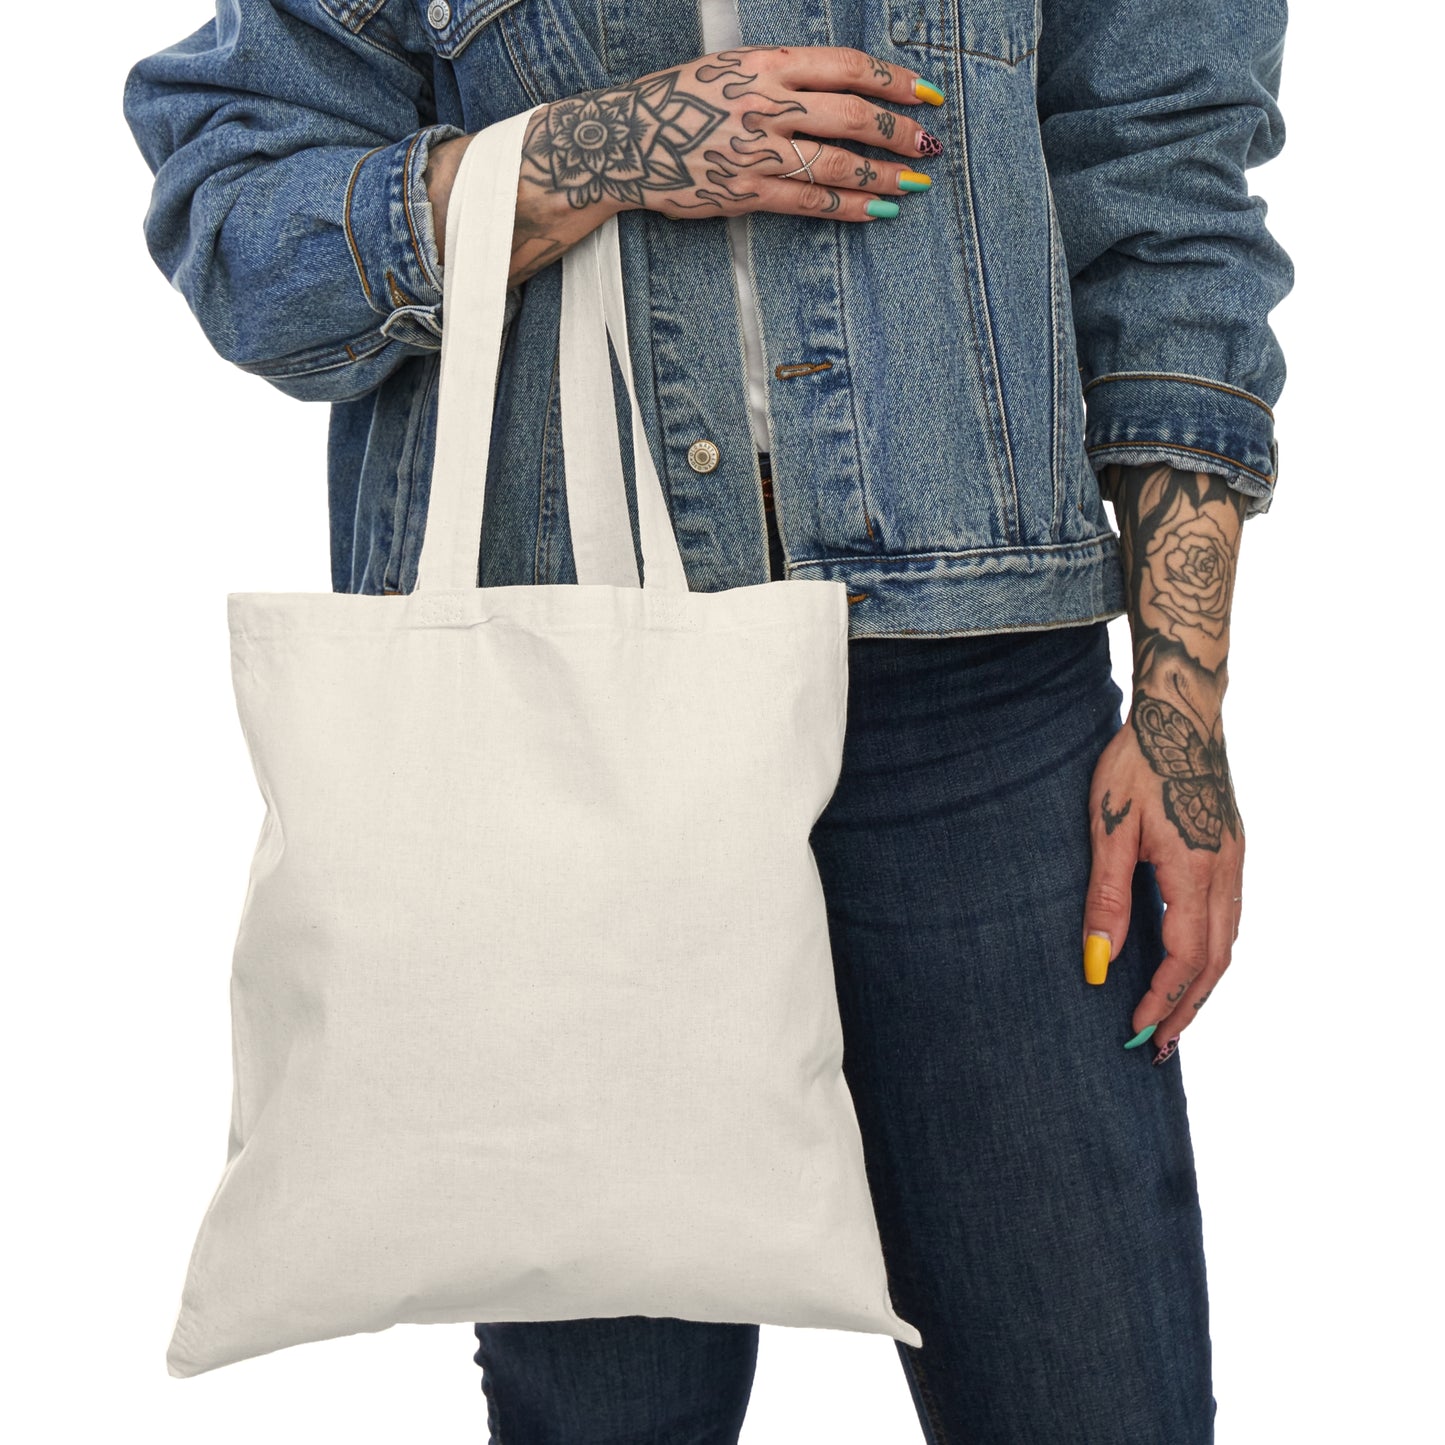 Habits Are Hot Tote Bag